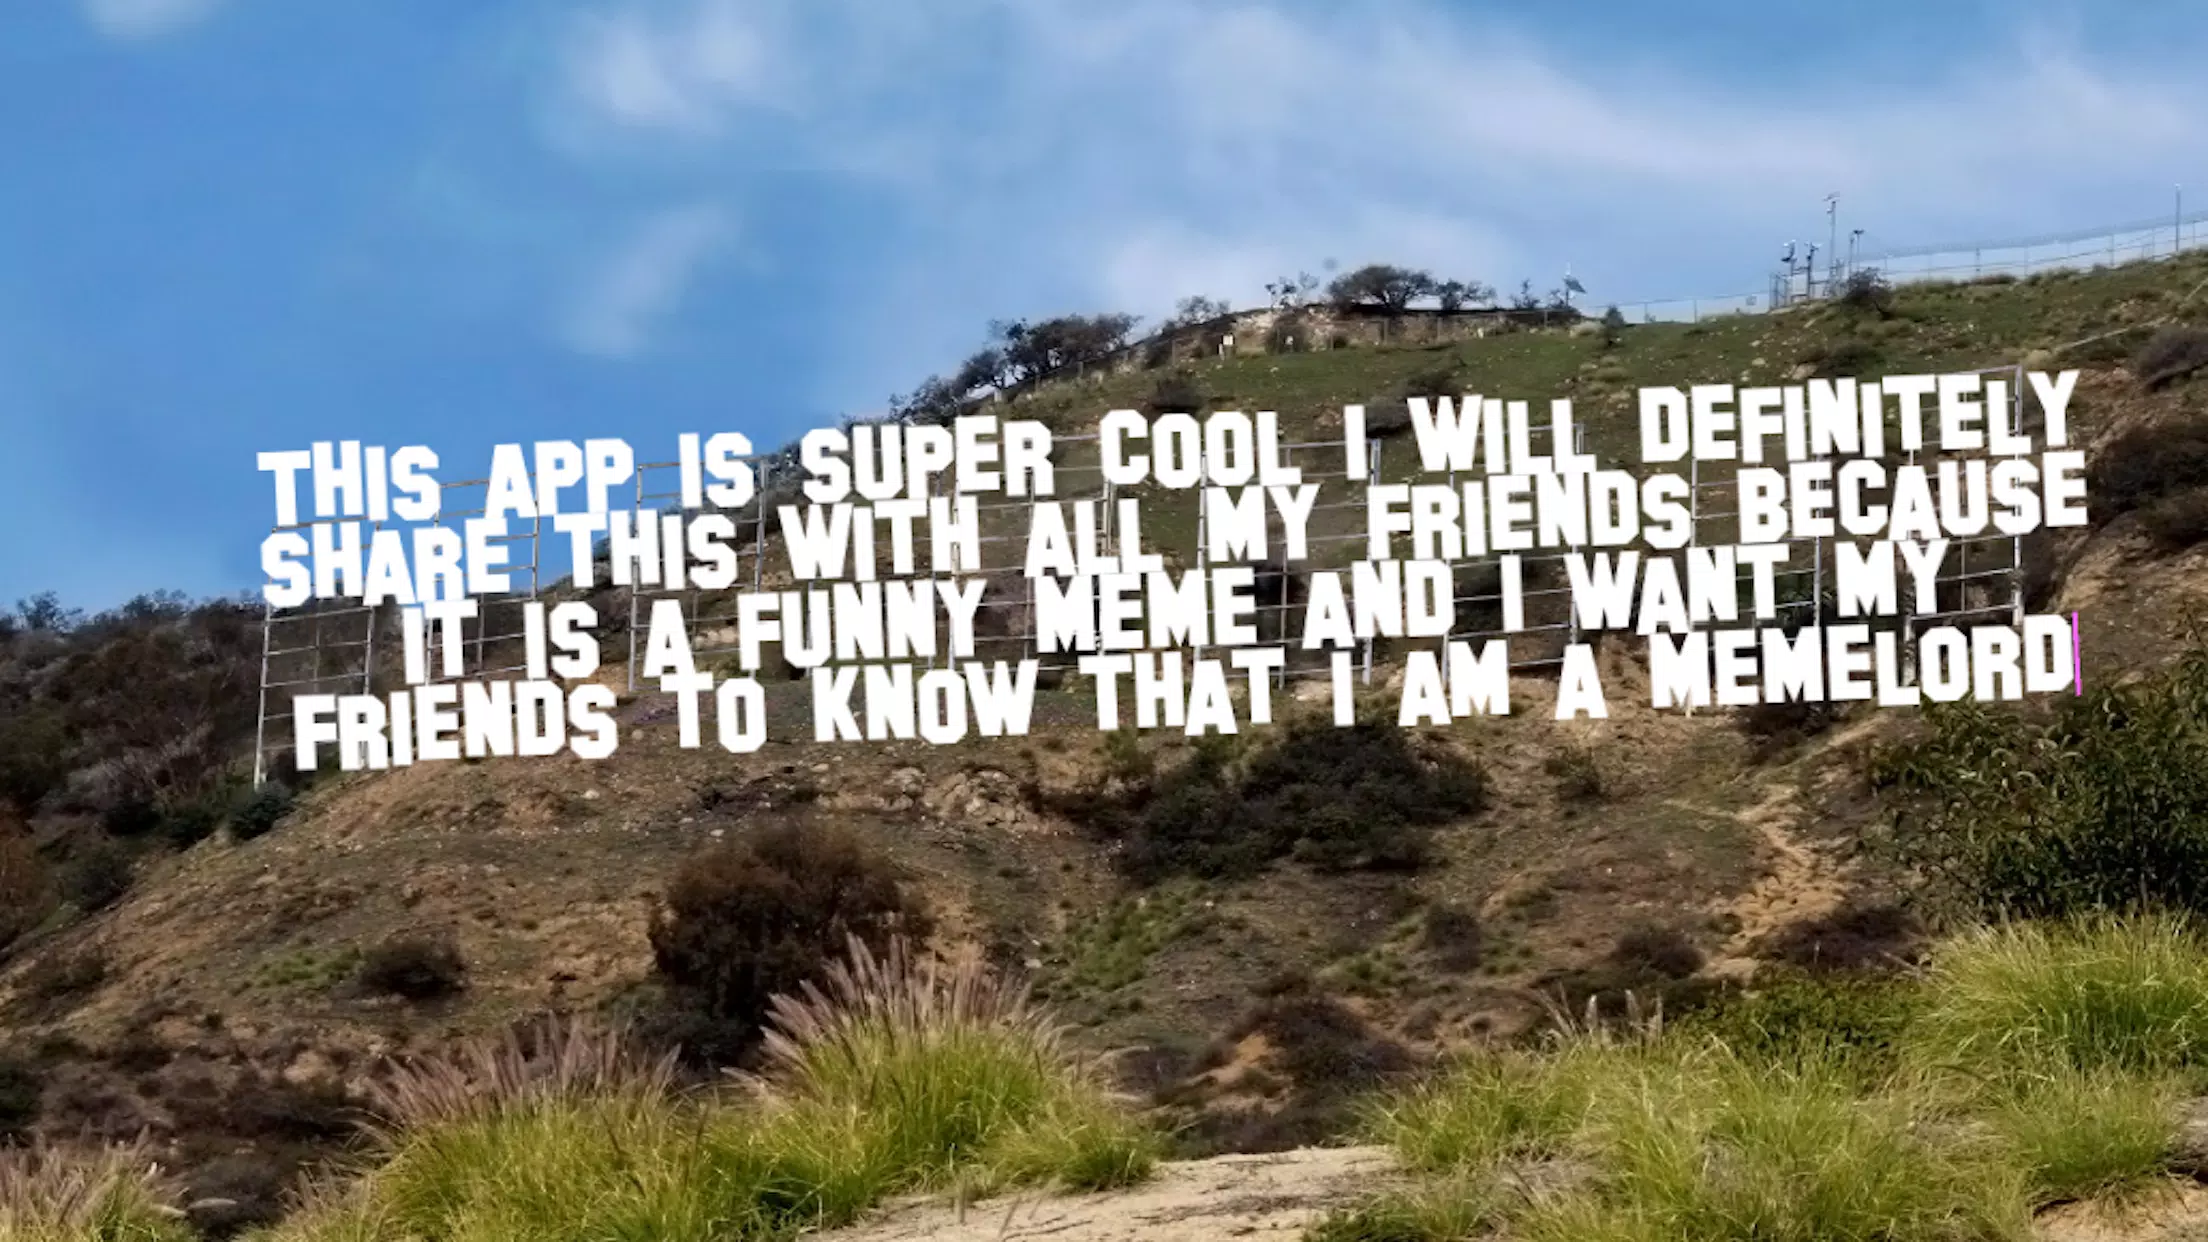 Hollywood Sign Generator for Android - APK Download